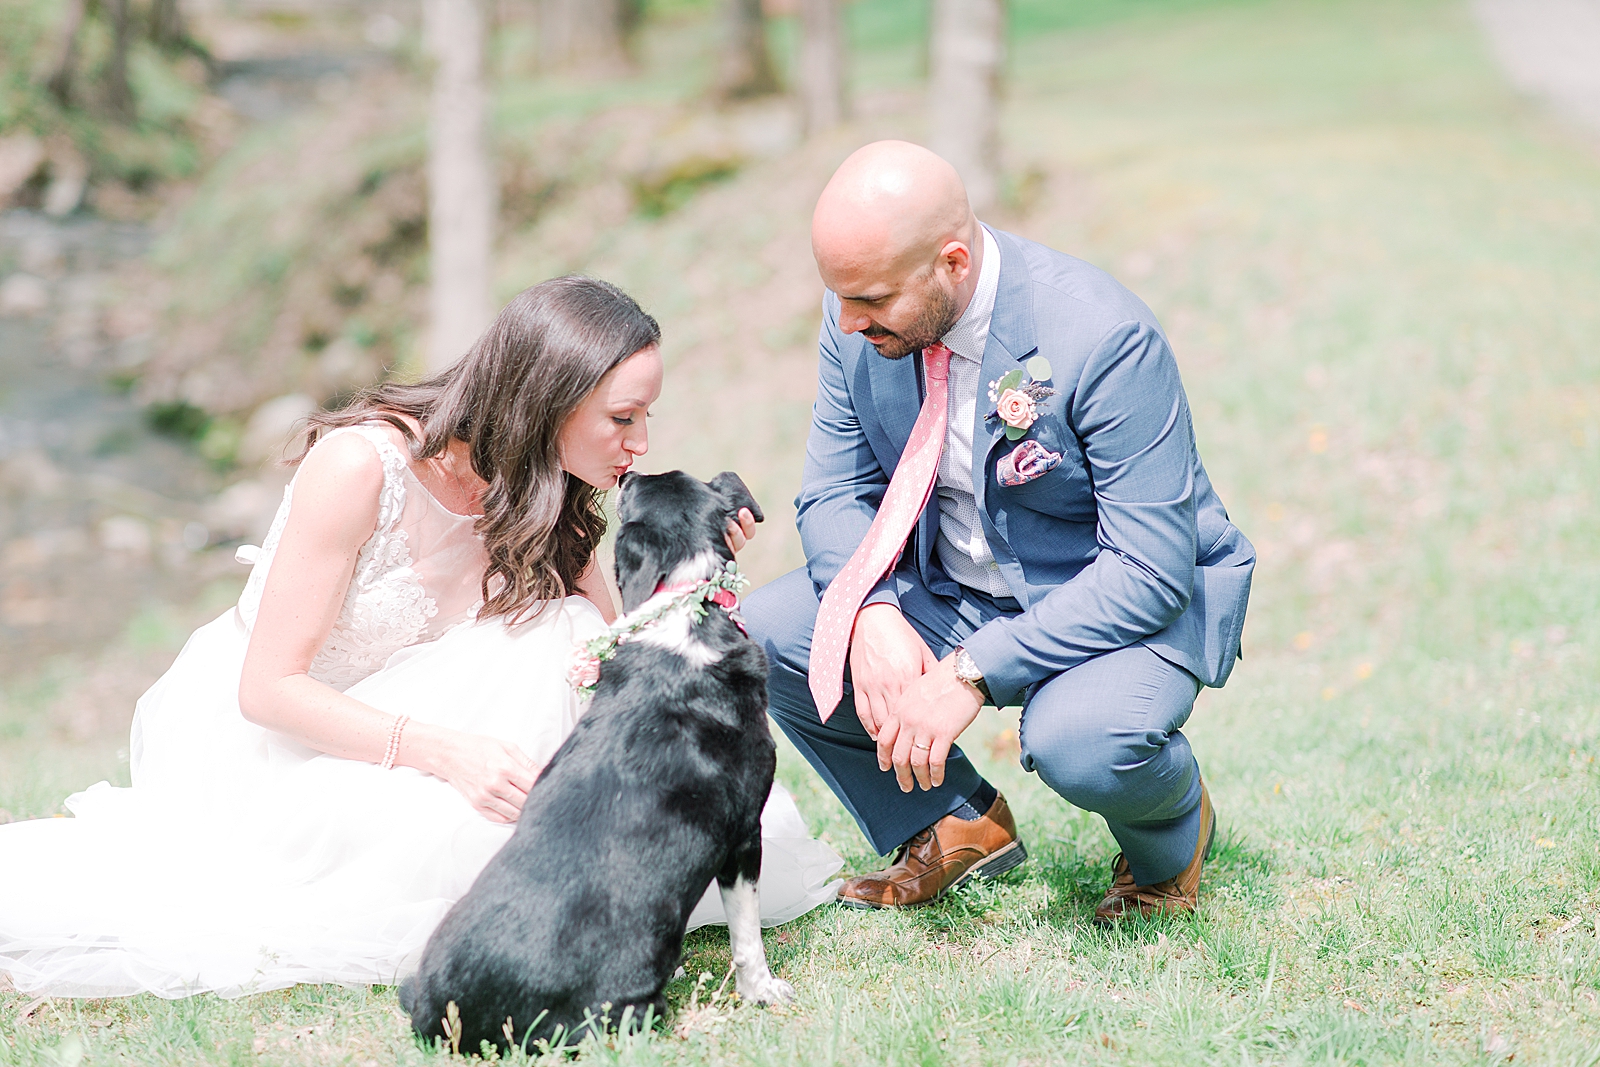 Spring Hawkesdene Wedding Bride and Groom kissing and petting dog Photo